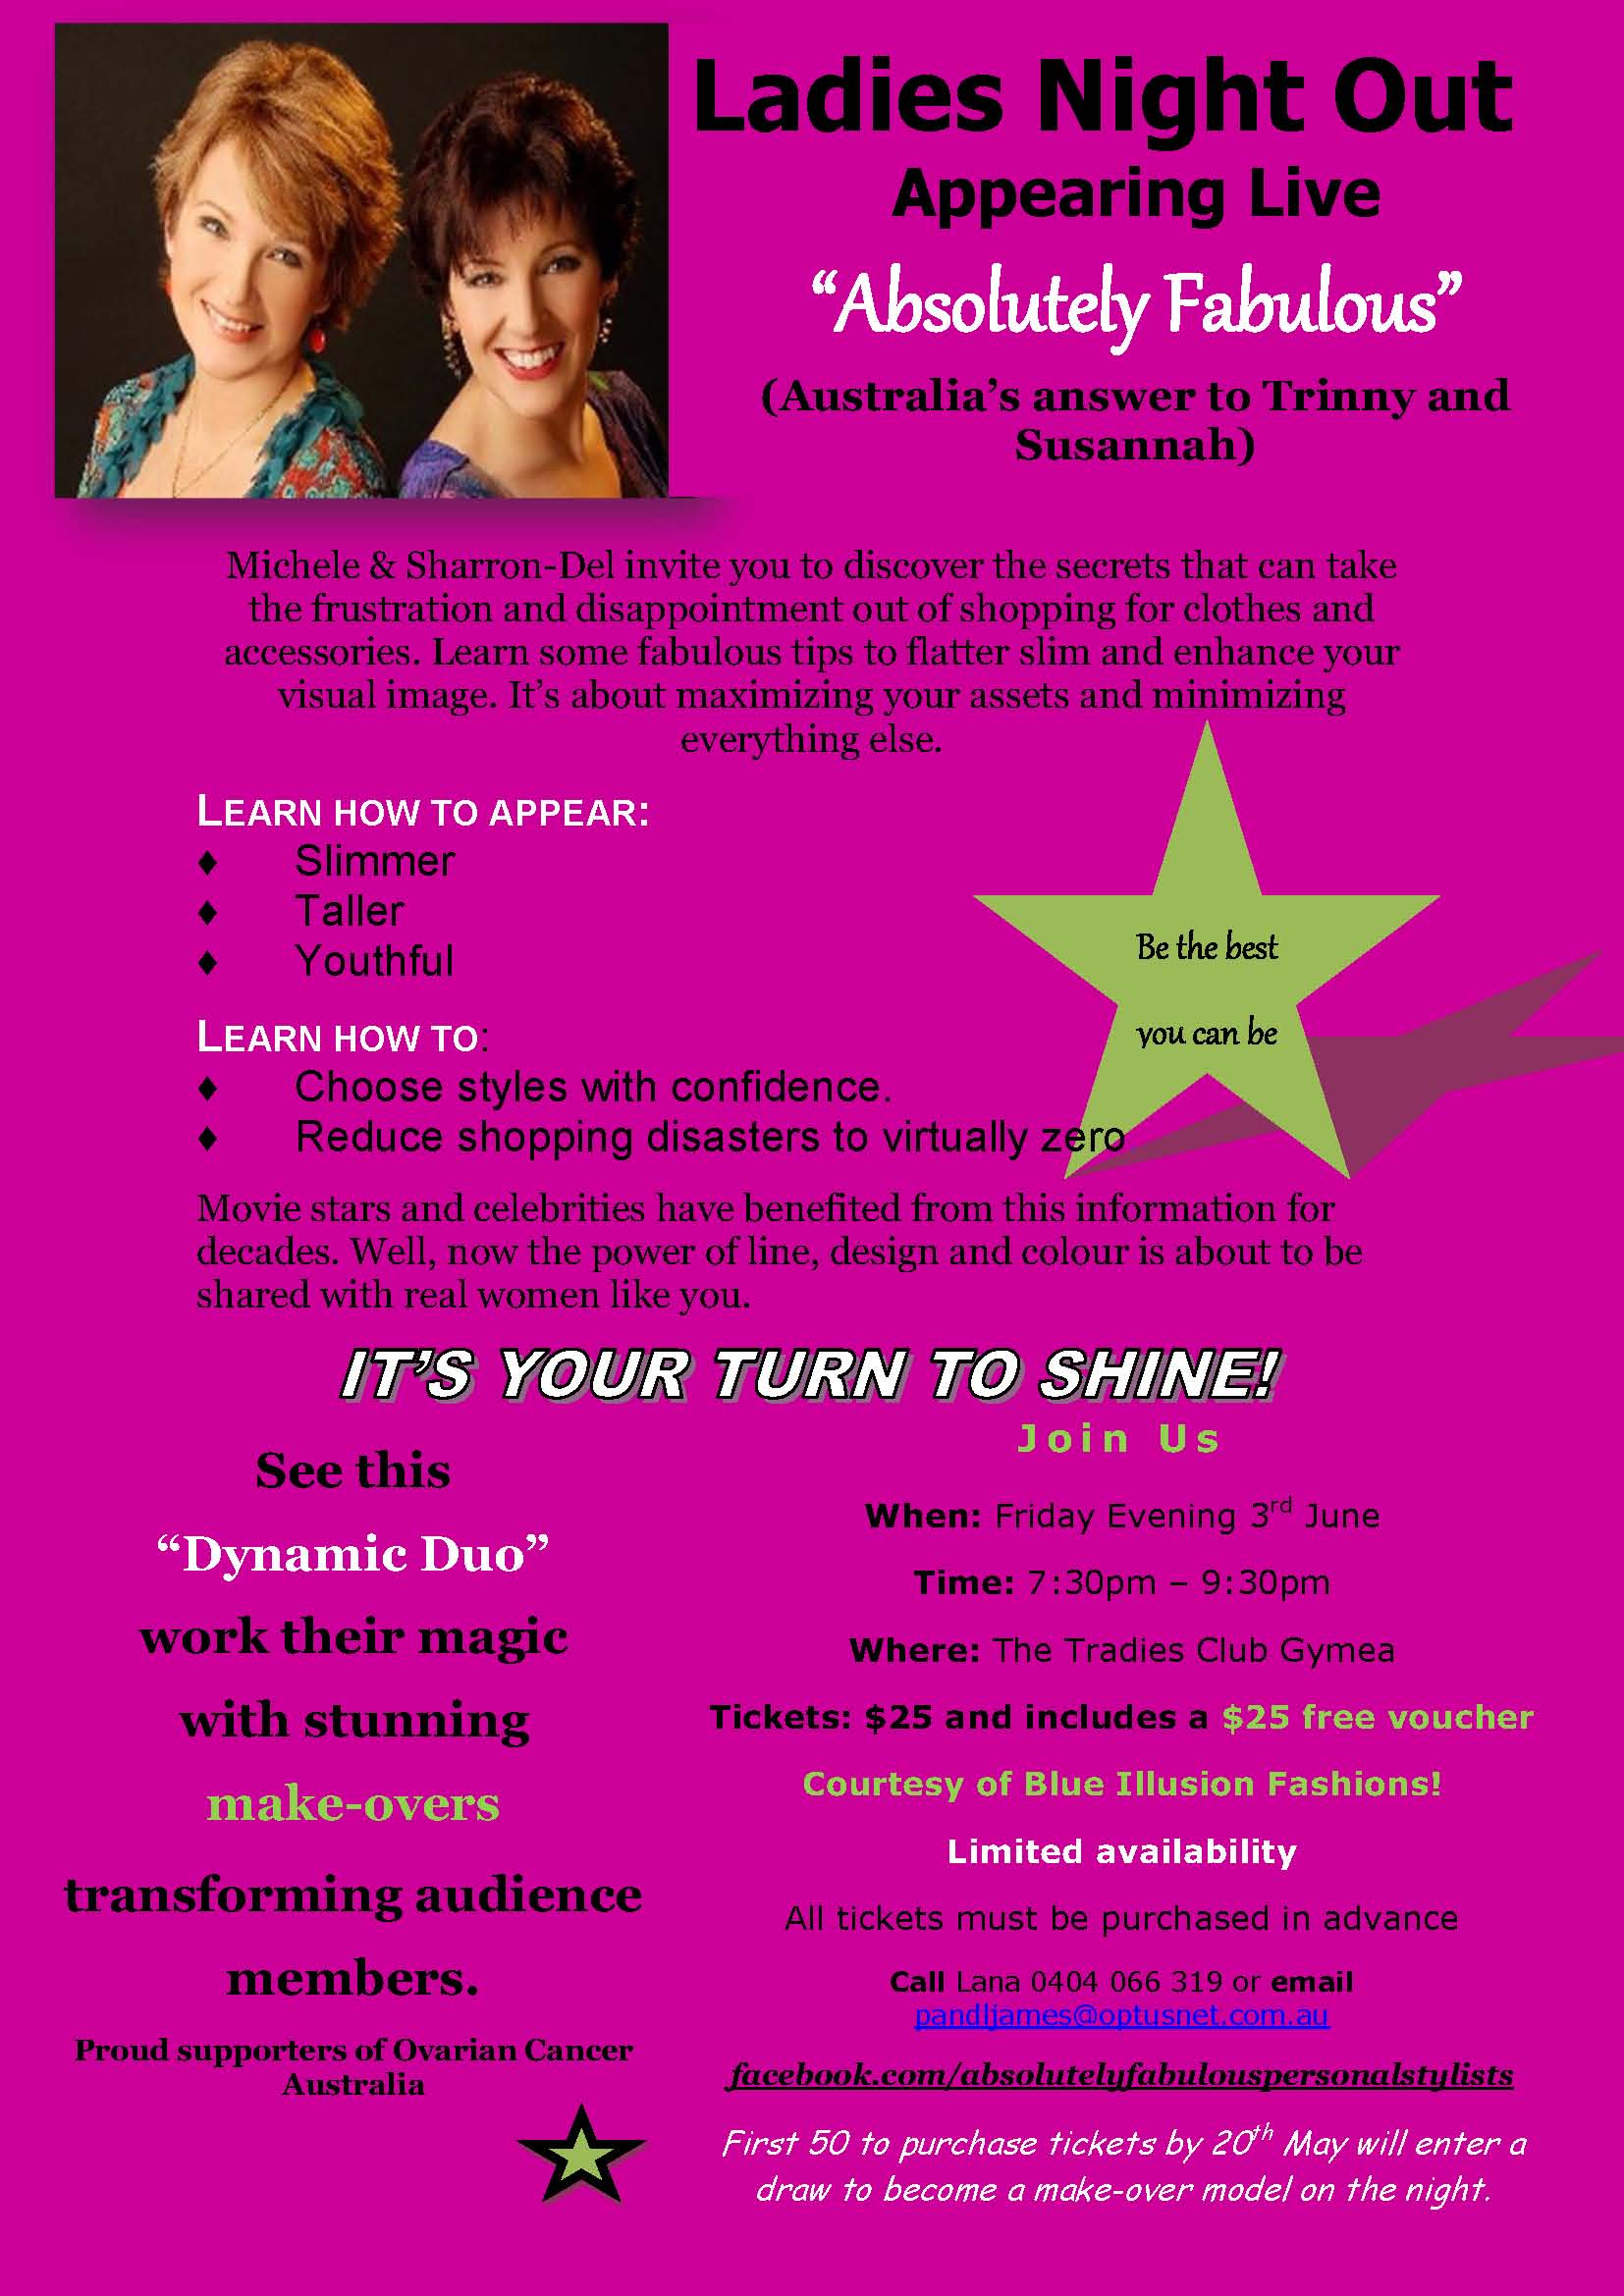 Ladies Night Out Appearing Live “Absolutely Fabulous” (Australia’s answer to Trinny and Susannah)